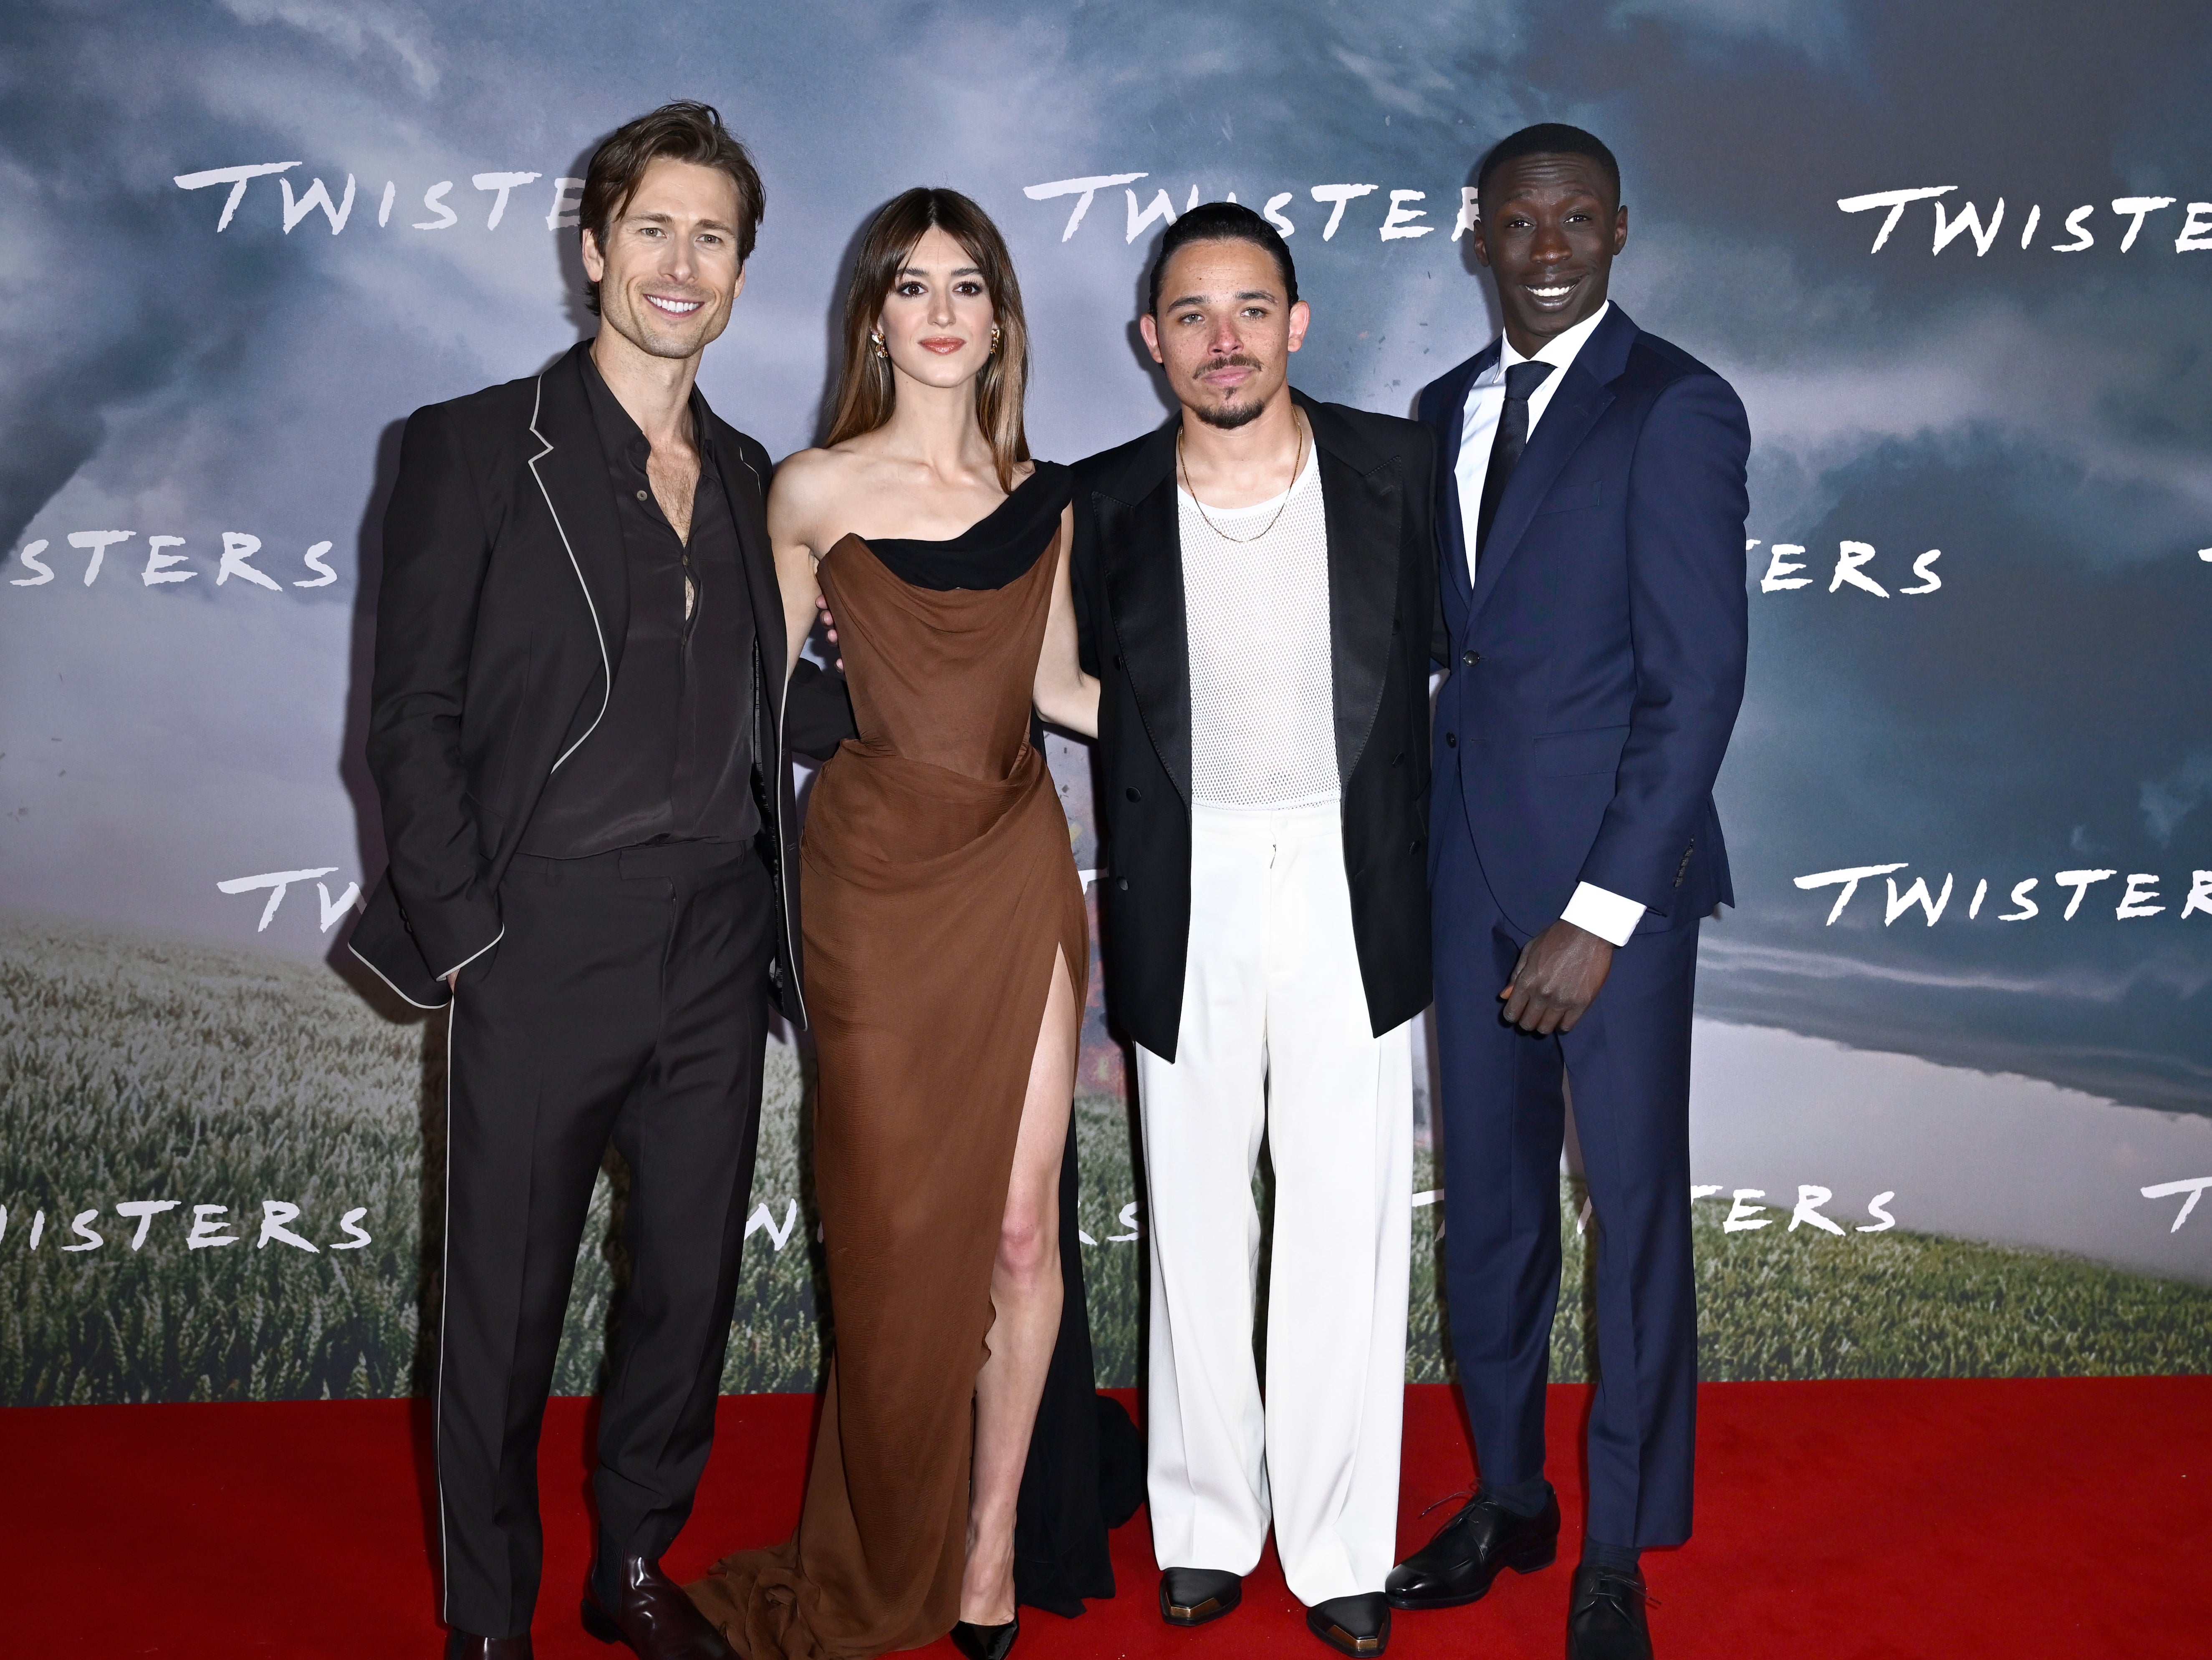 Cast of ‘Twisters' on the red carpet at the movie’s London premiere